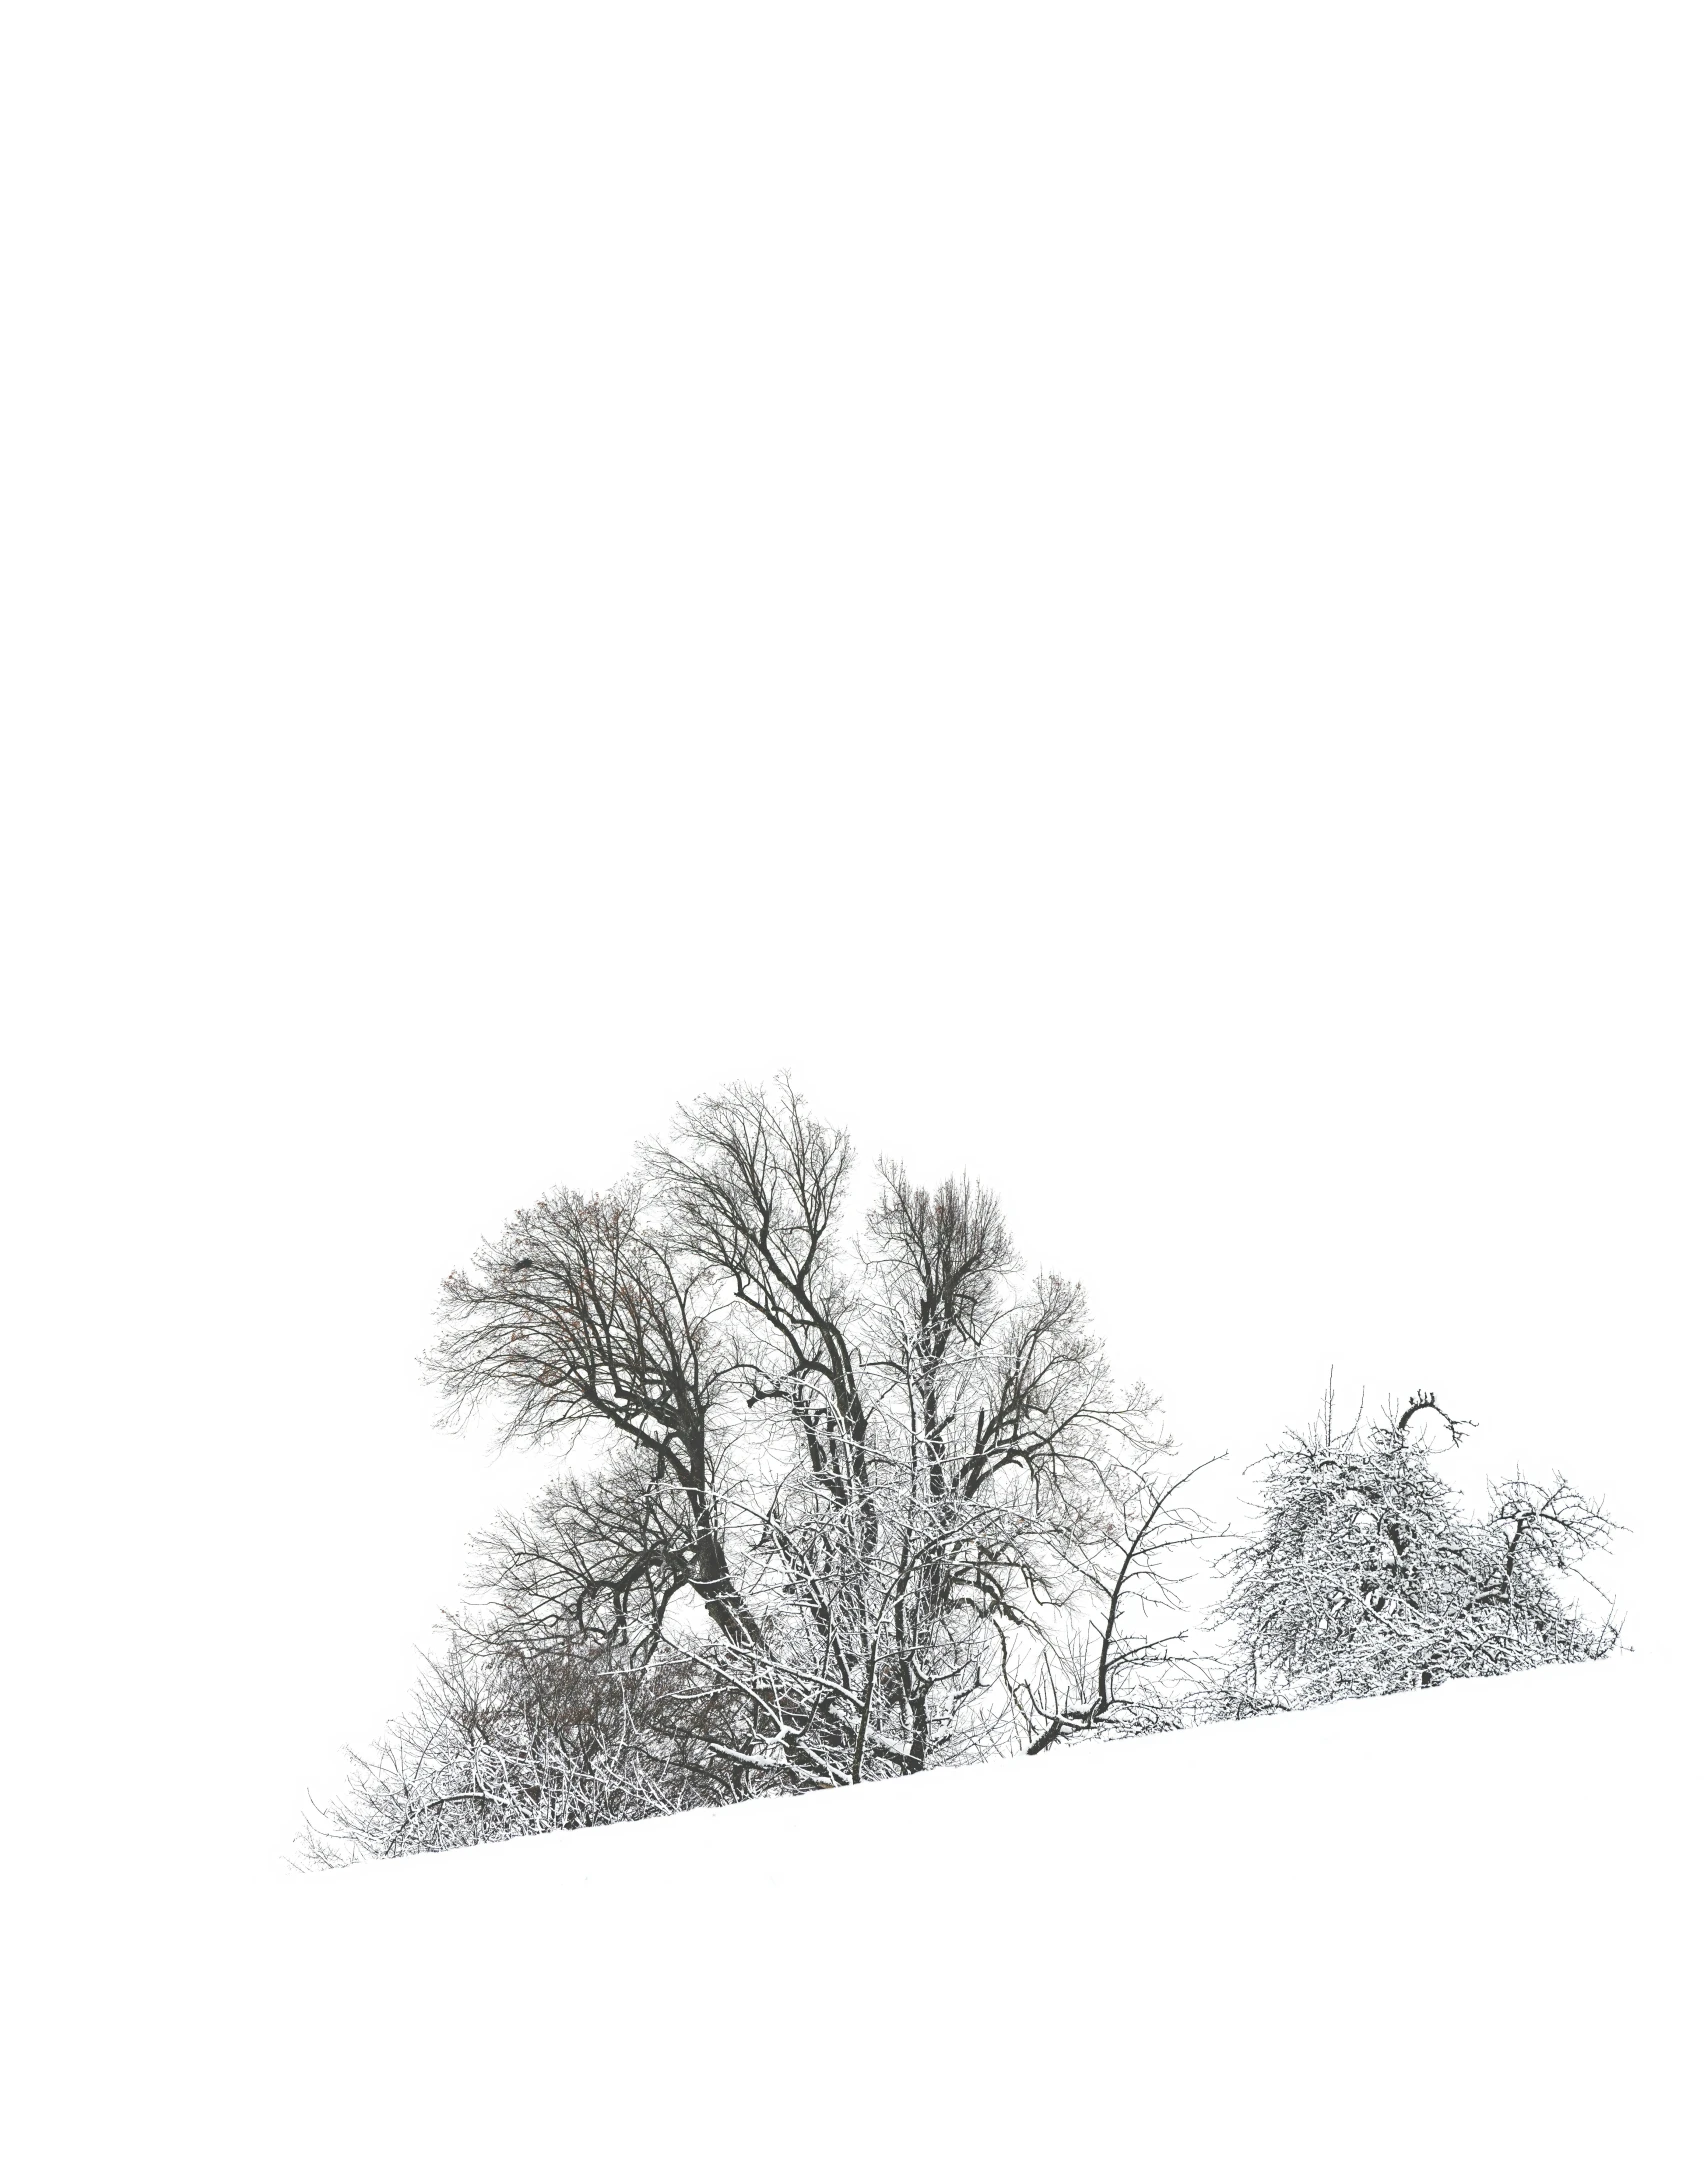 a single tree stands in the snow while it is winter